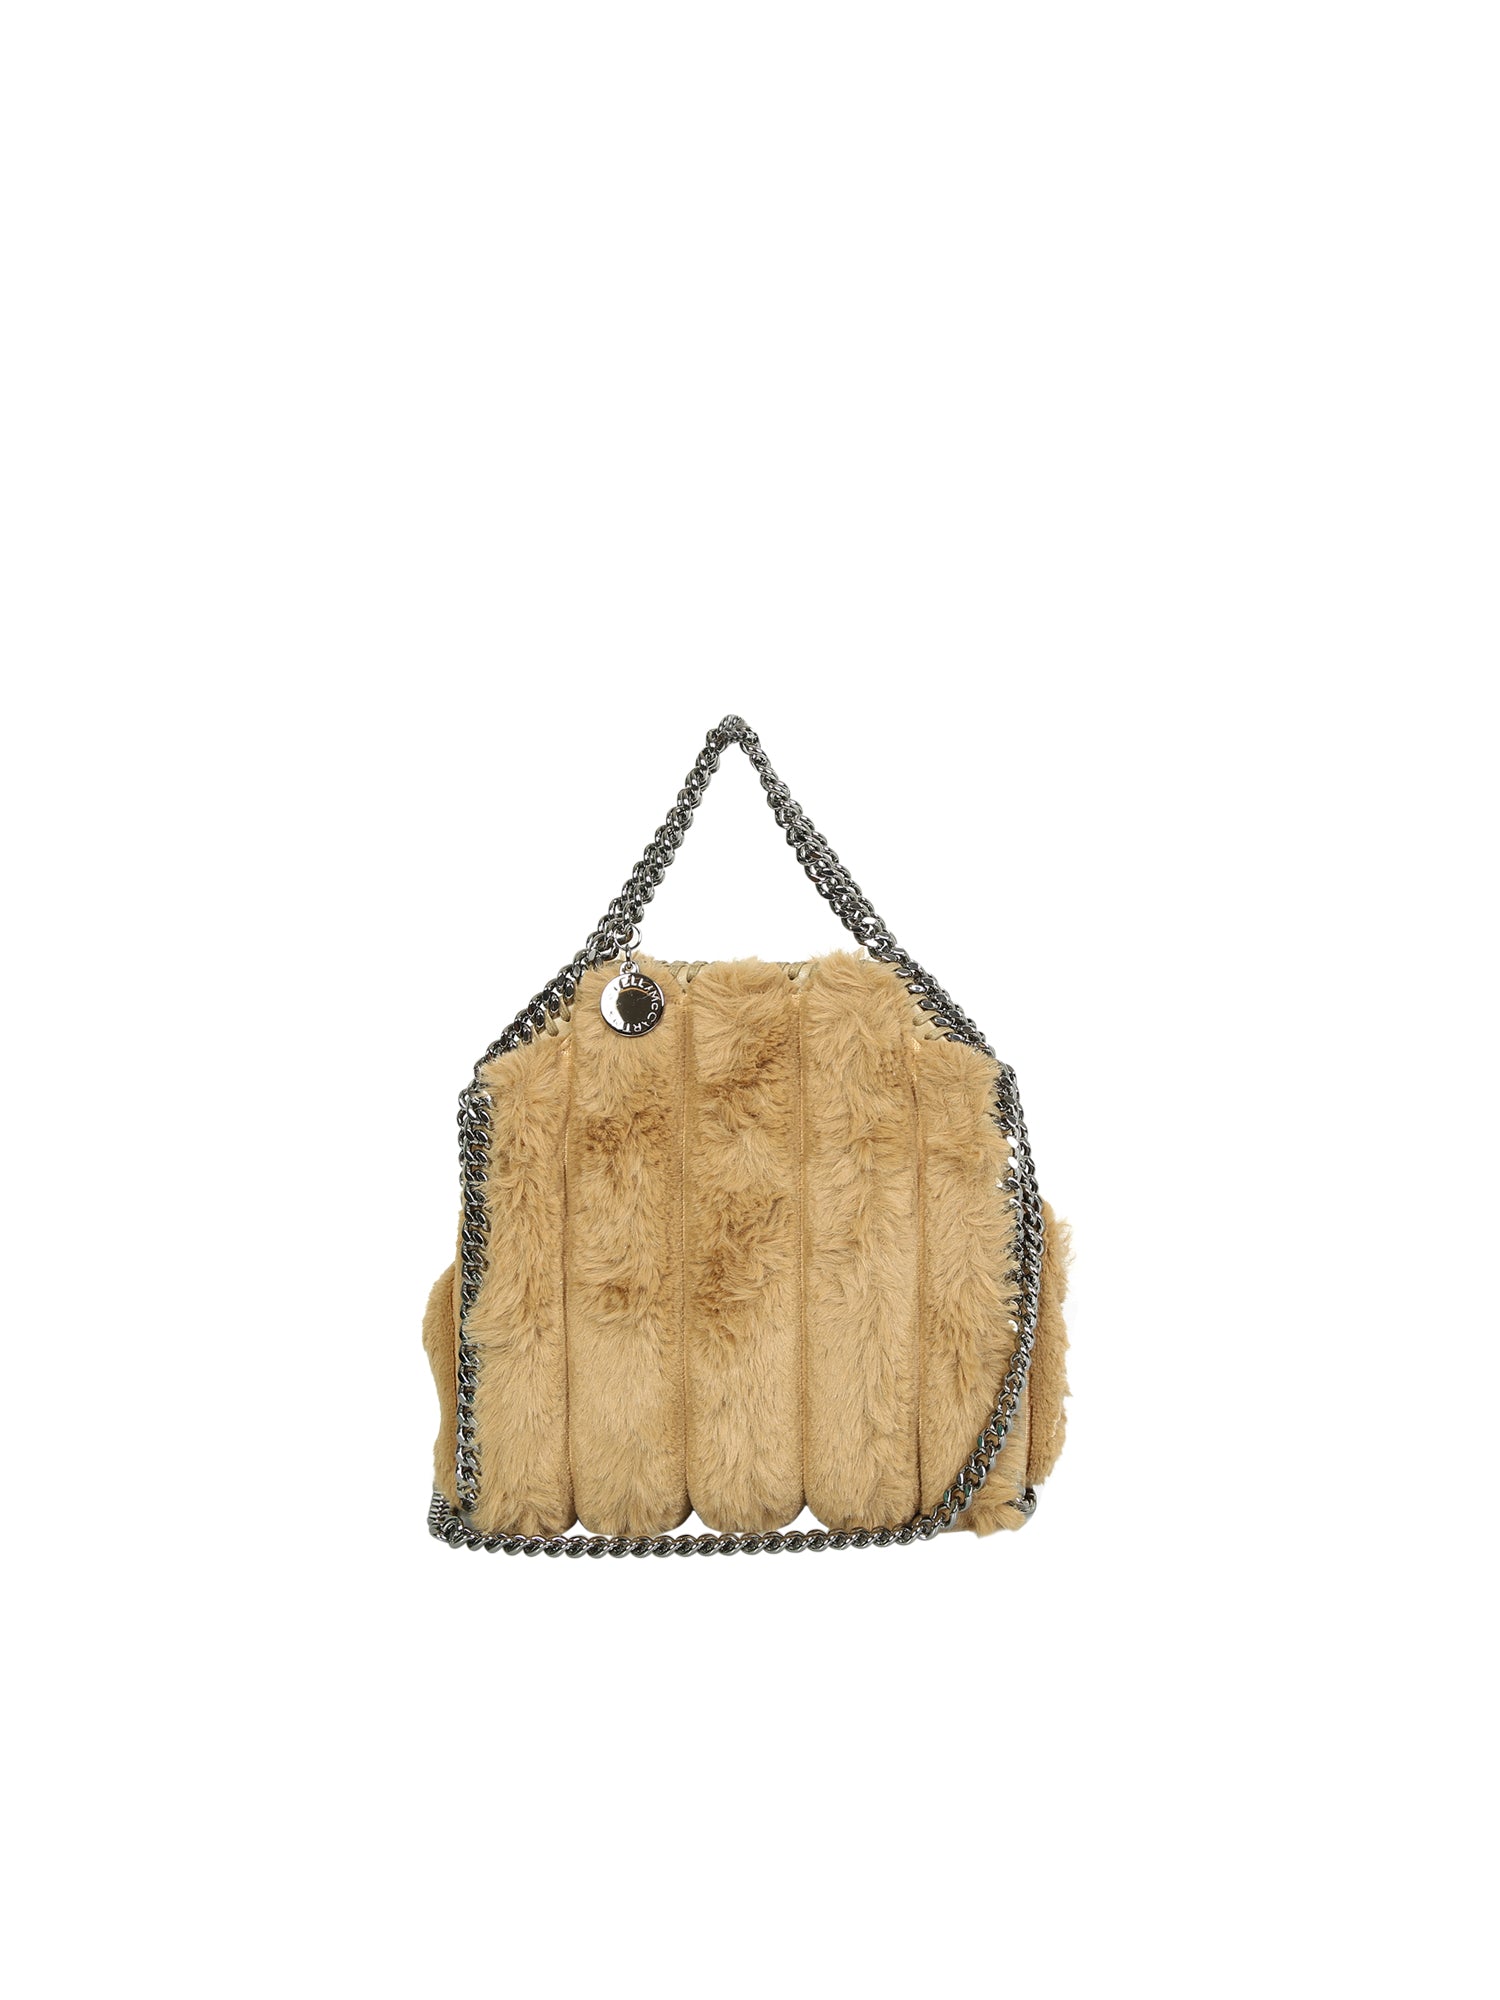 STELLA MCCARTNEY STELLA MCCARTNEY TINY FALABELLA IN FAUX FUR IS THE MINI VERSION OF THE MAISON'S ICONIC BAG